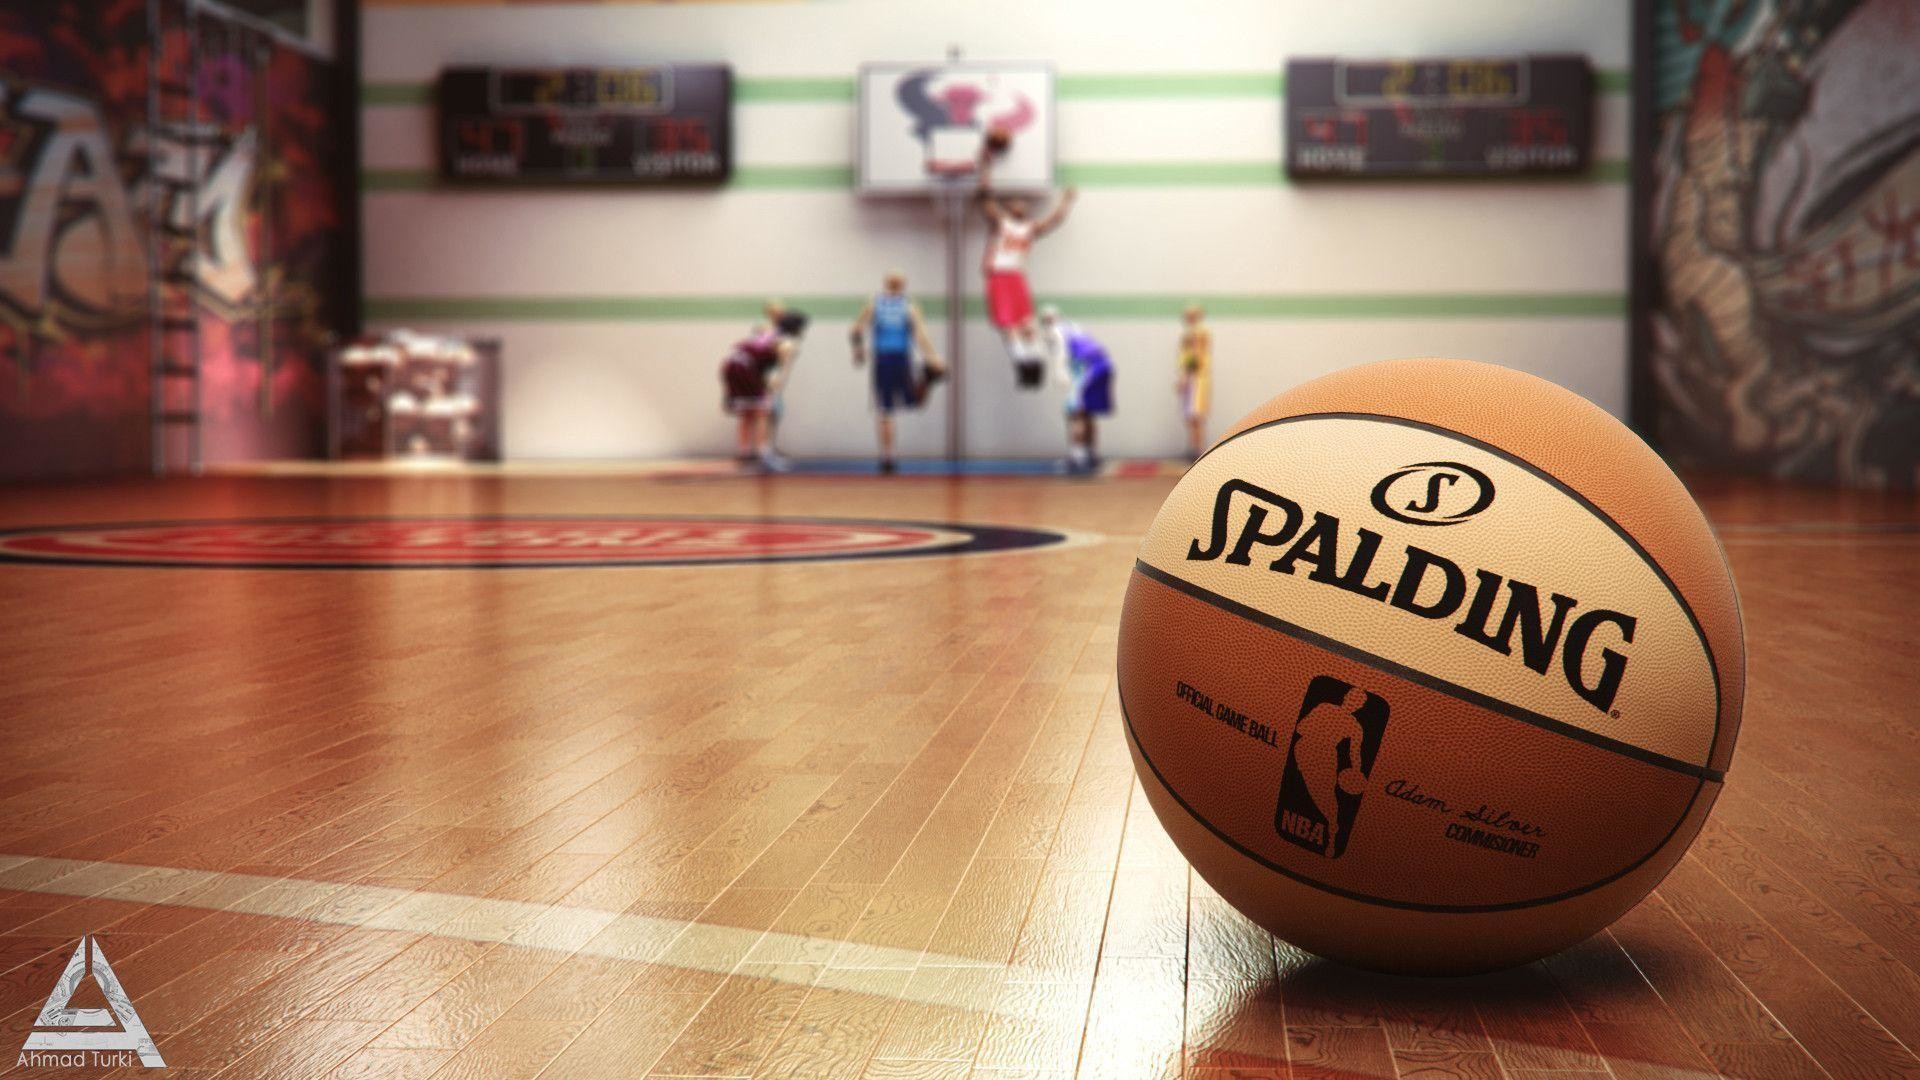 1920x1080 Wallpapers For > Basketball Court Wallpapers Hd